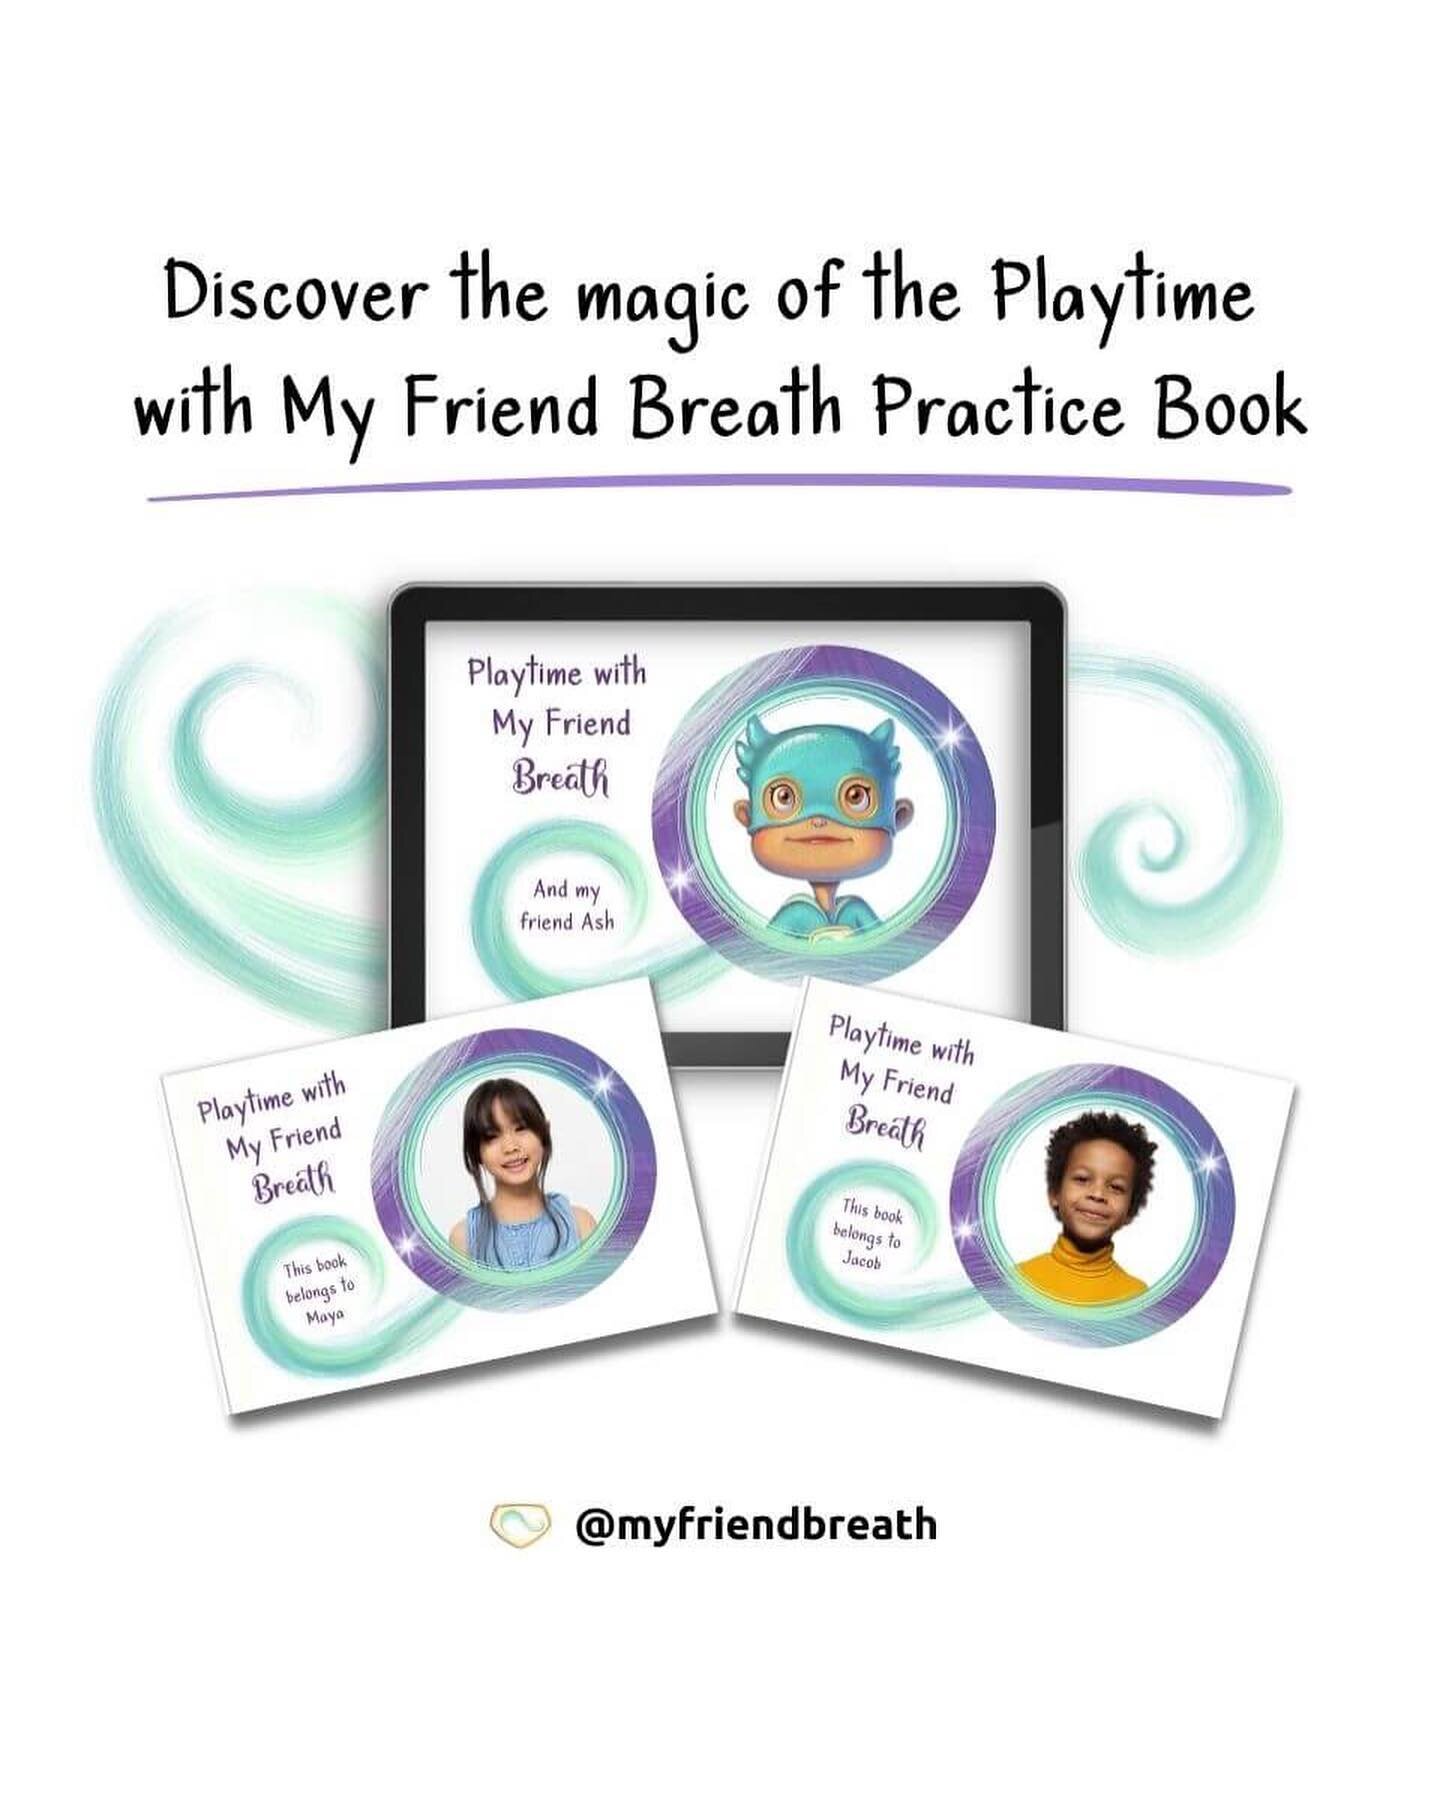 Do you wish your child could more confidently manage their big emotions? 🧐

🔑 Practice is the key to strengthening their emotional-regulation and resilience skills.

Playtime with My Friend Breath provides an engaging way to learn and practice the 